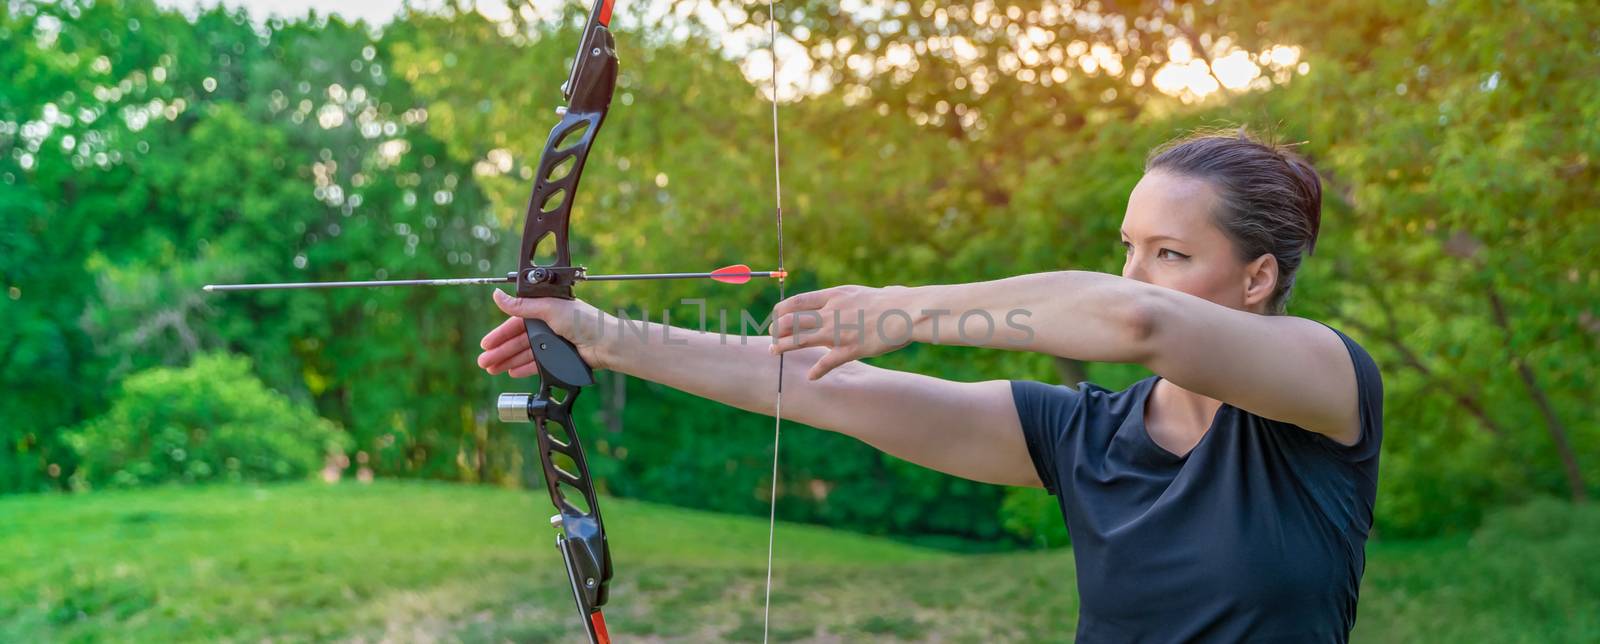 archery in nature, young woman aiming an arrow at a target by Edophoto